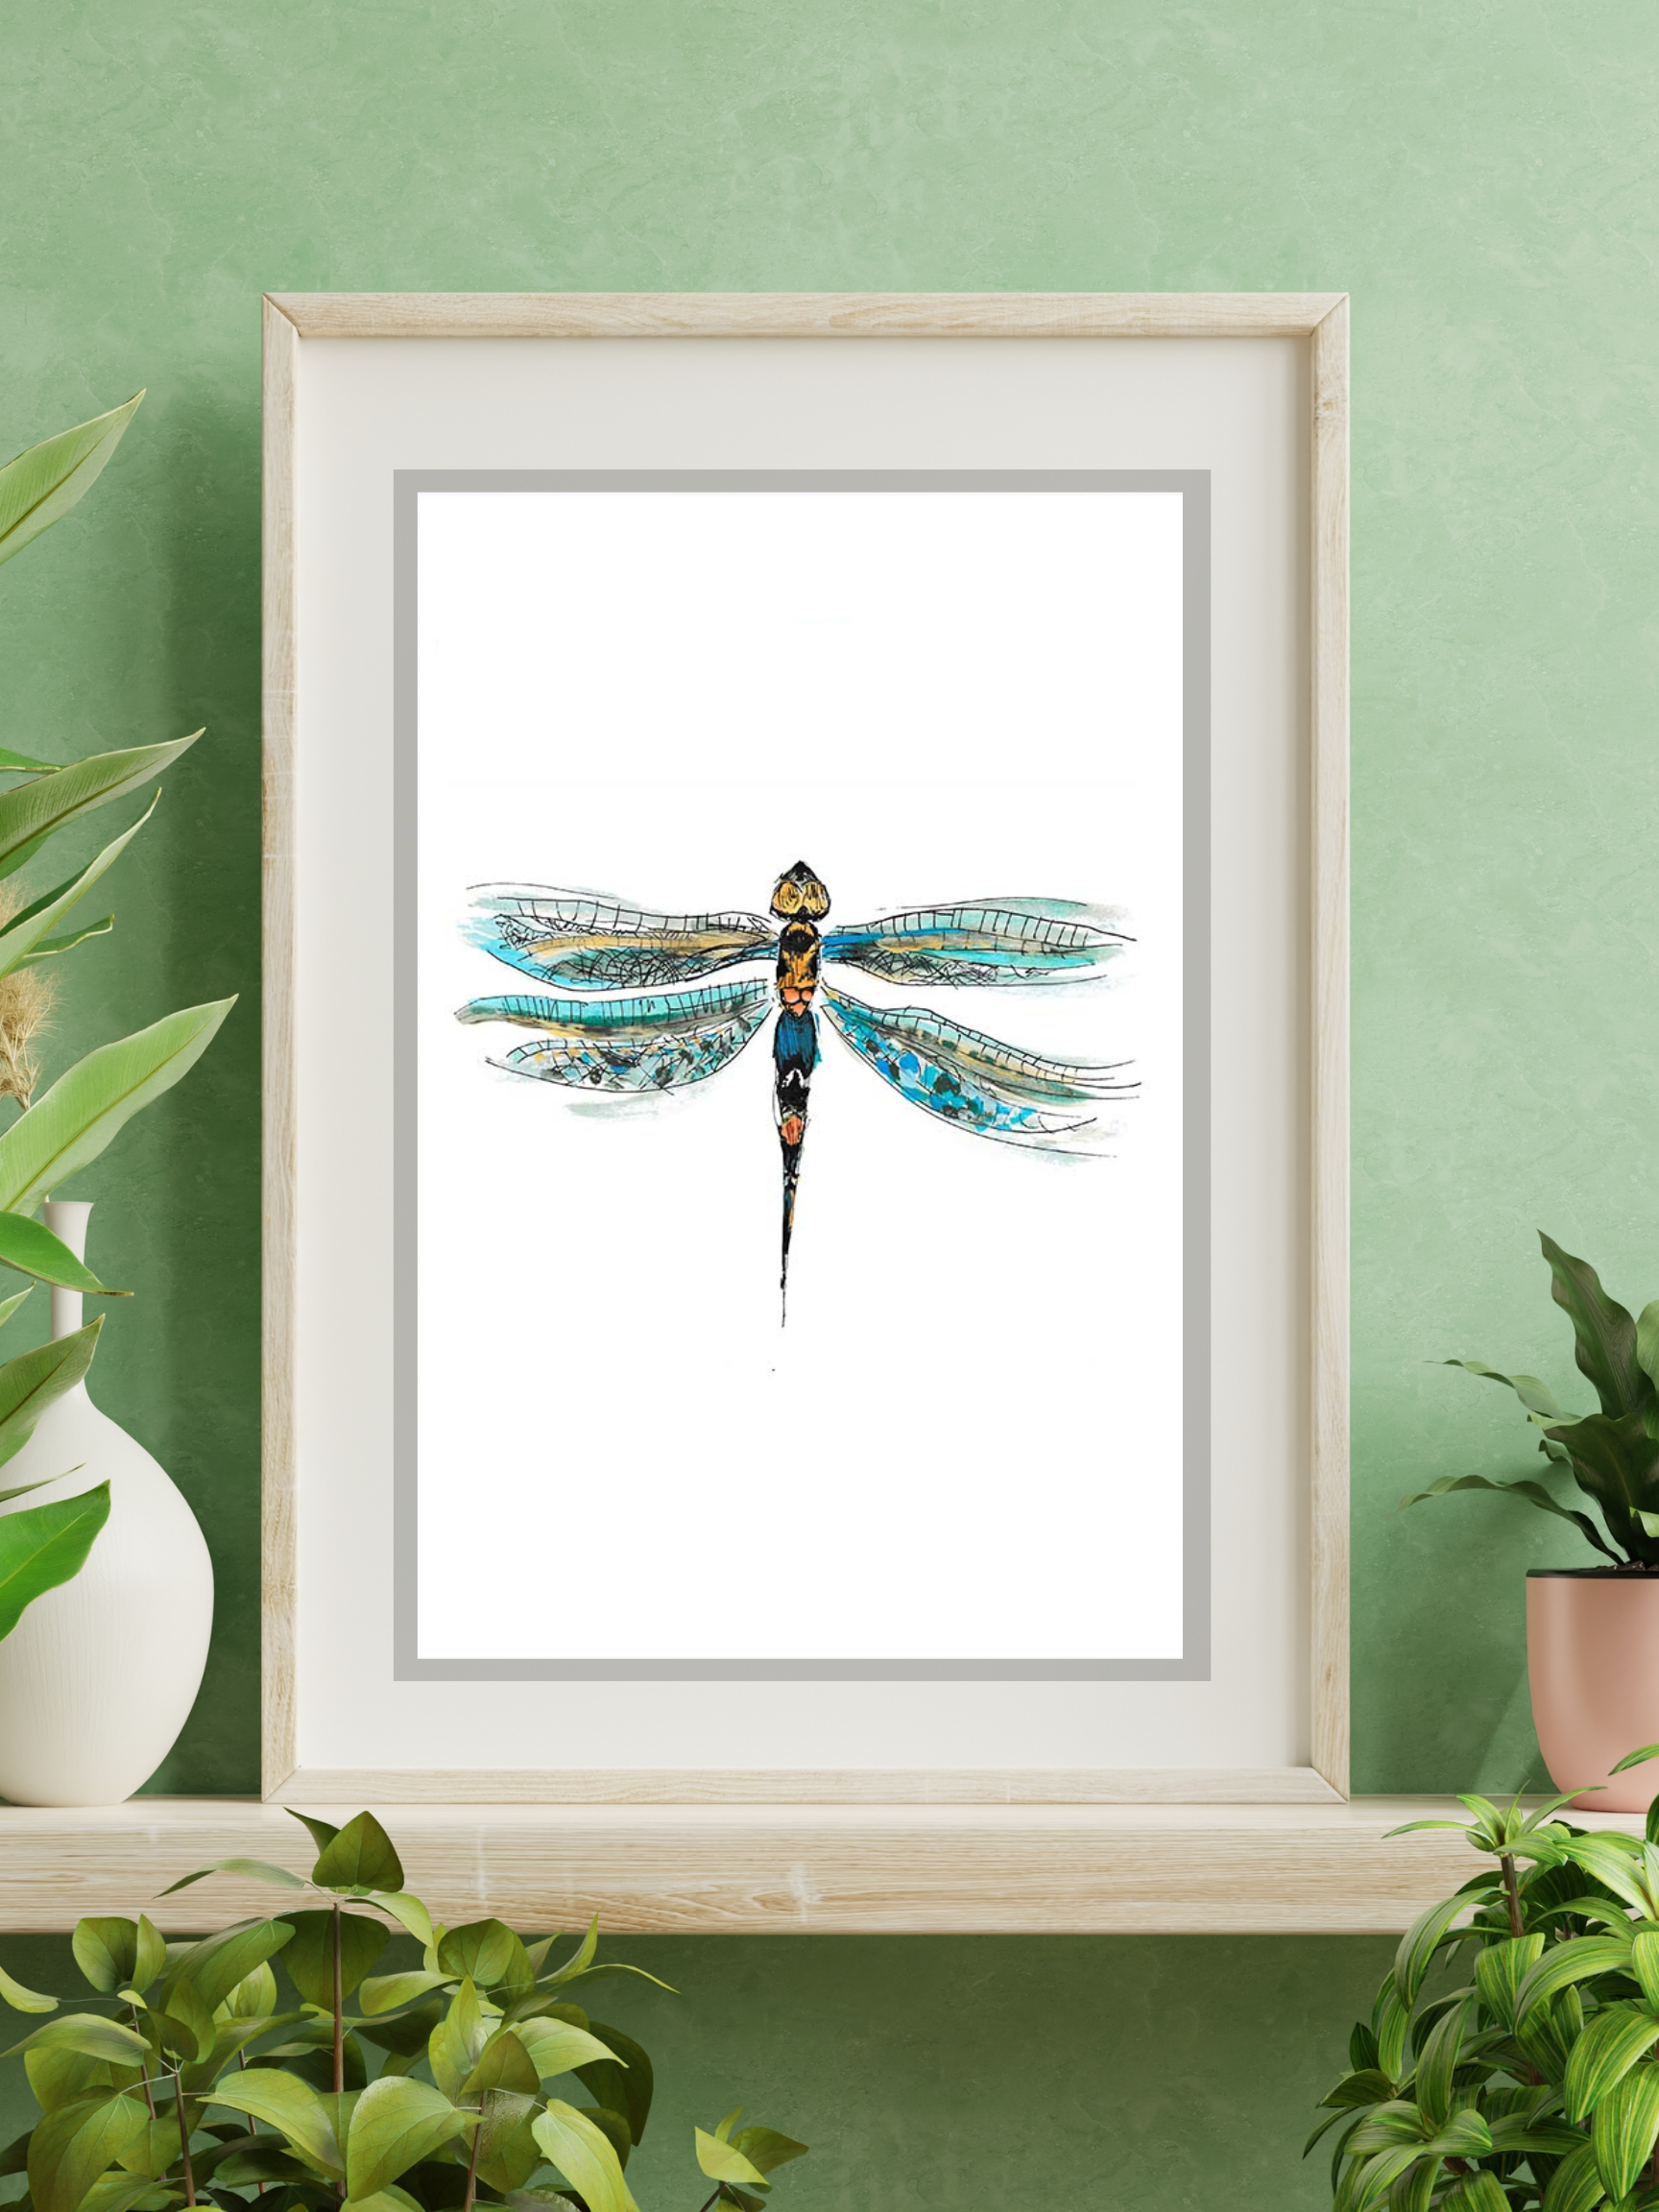 dragonfly art print in frame on green wall